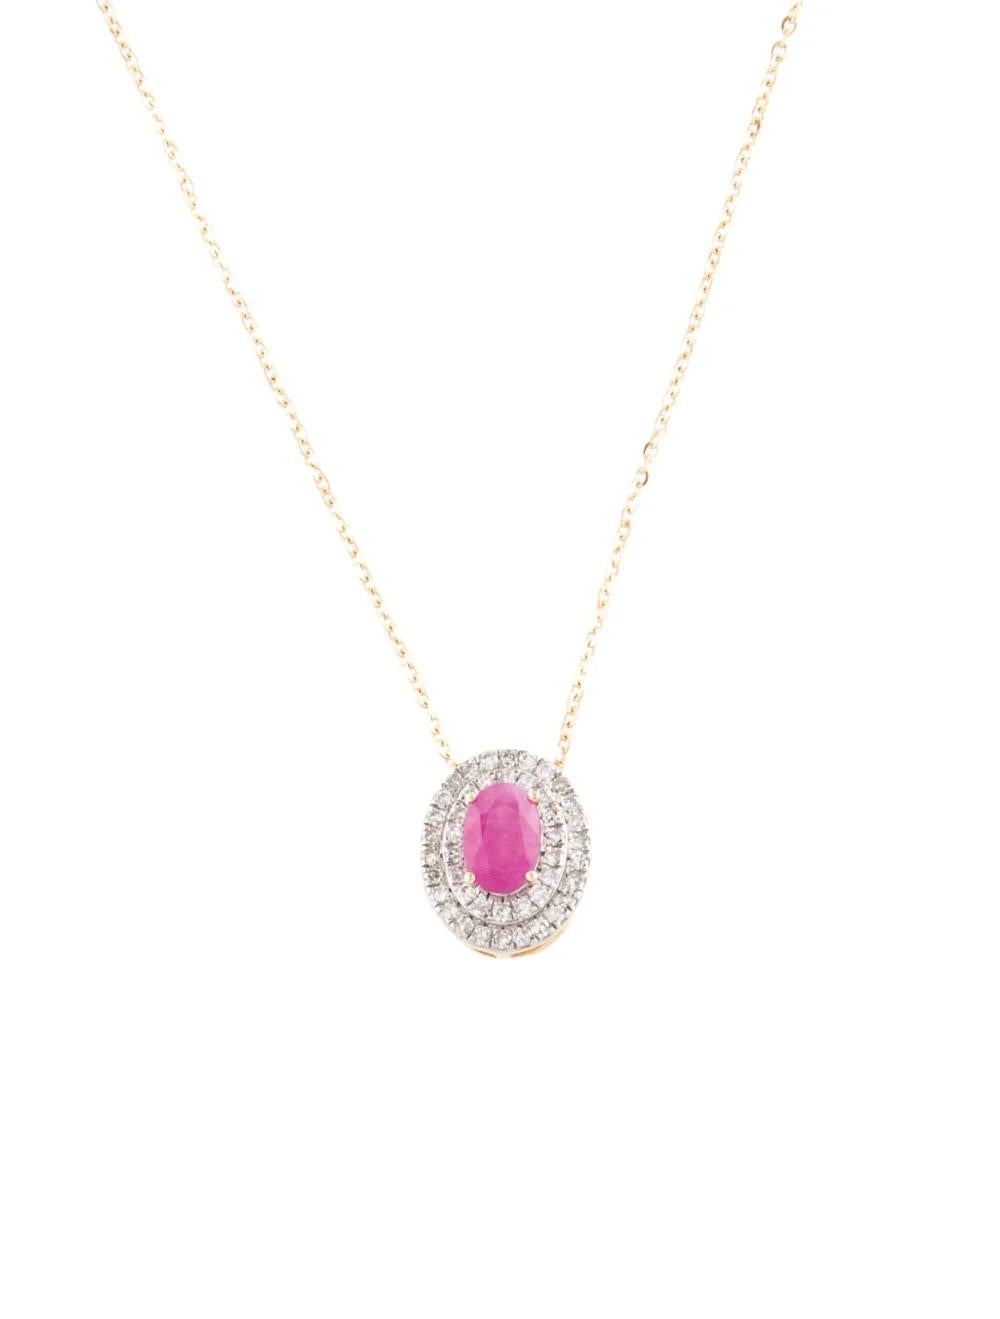 Indulge in timeless elegance with this exquisite 14K Yellow Gold pendant necklace, adorned with a captivating 0.71 Carat Oval Brilliant Ruby and shimmering diamond accents.

SPECIFICATIONS:

* Metal Type: 14K Yellow Gold
* Total Item Weight: 2.5g
*